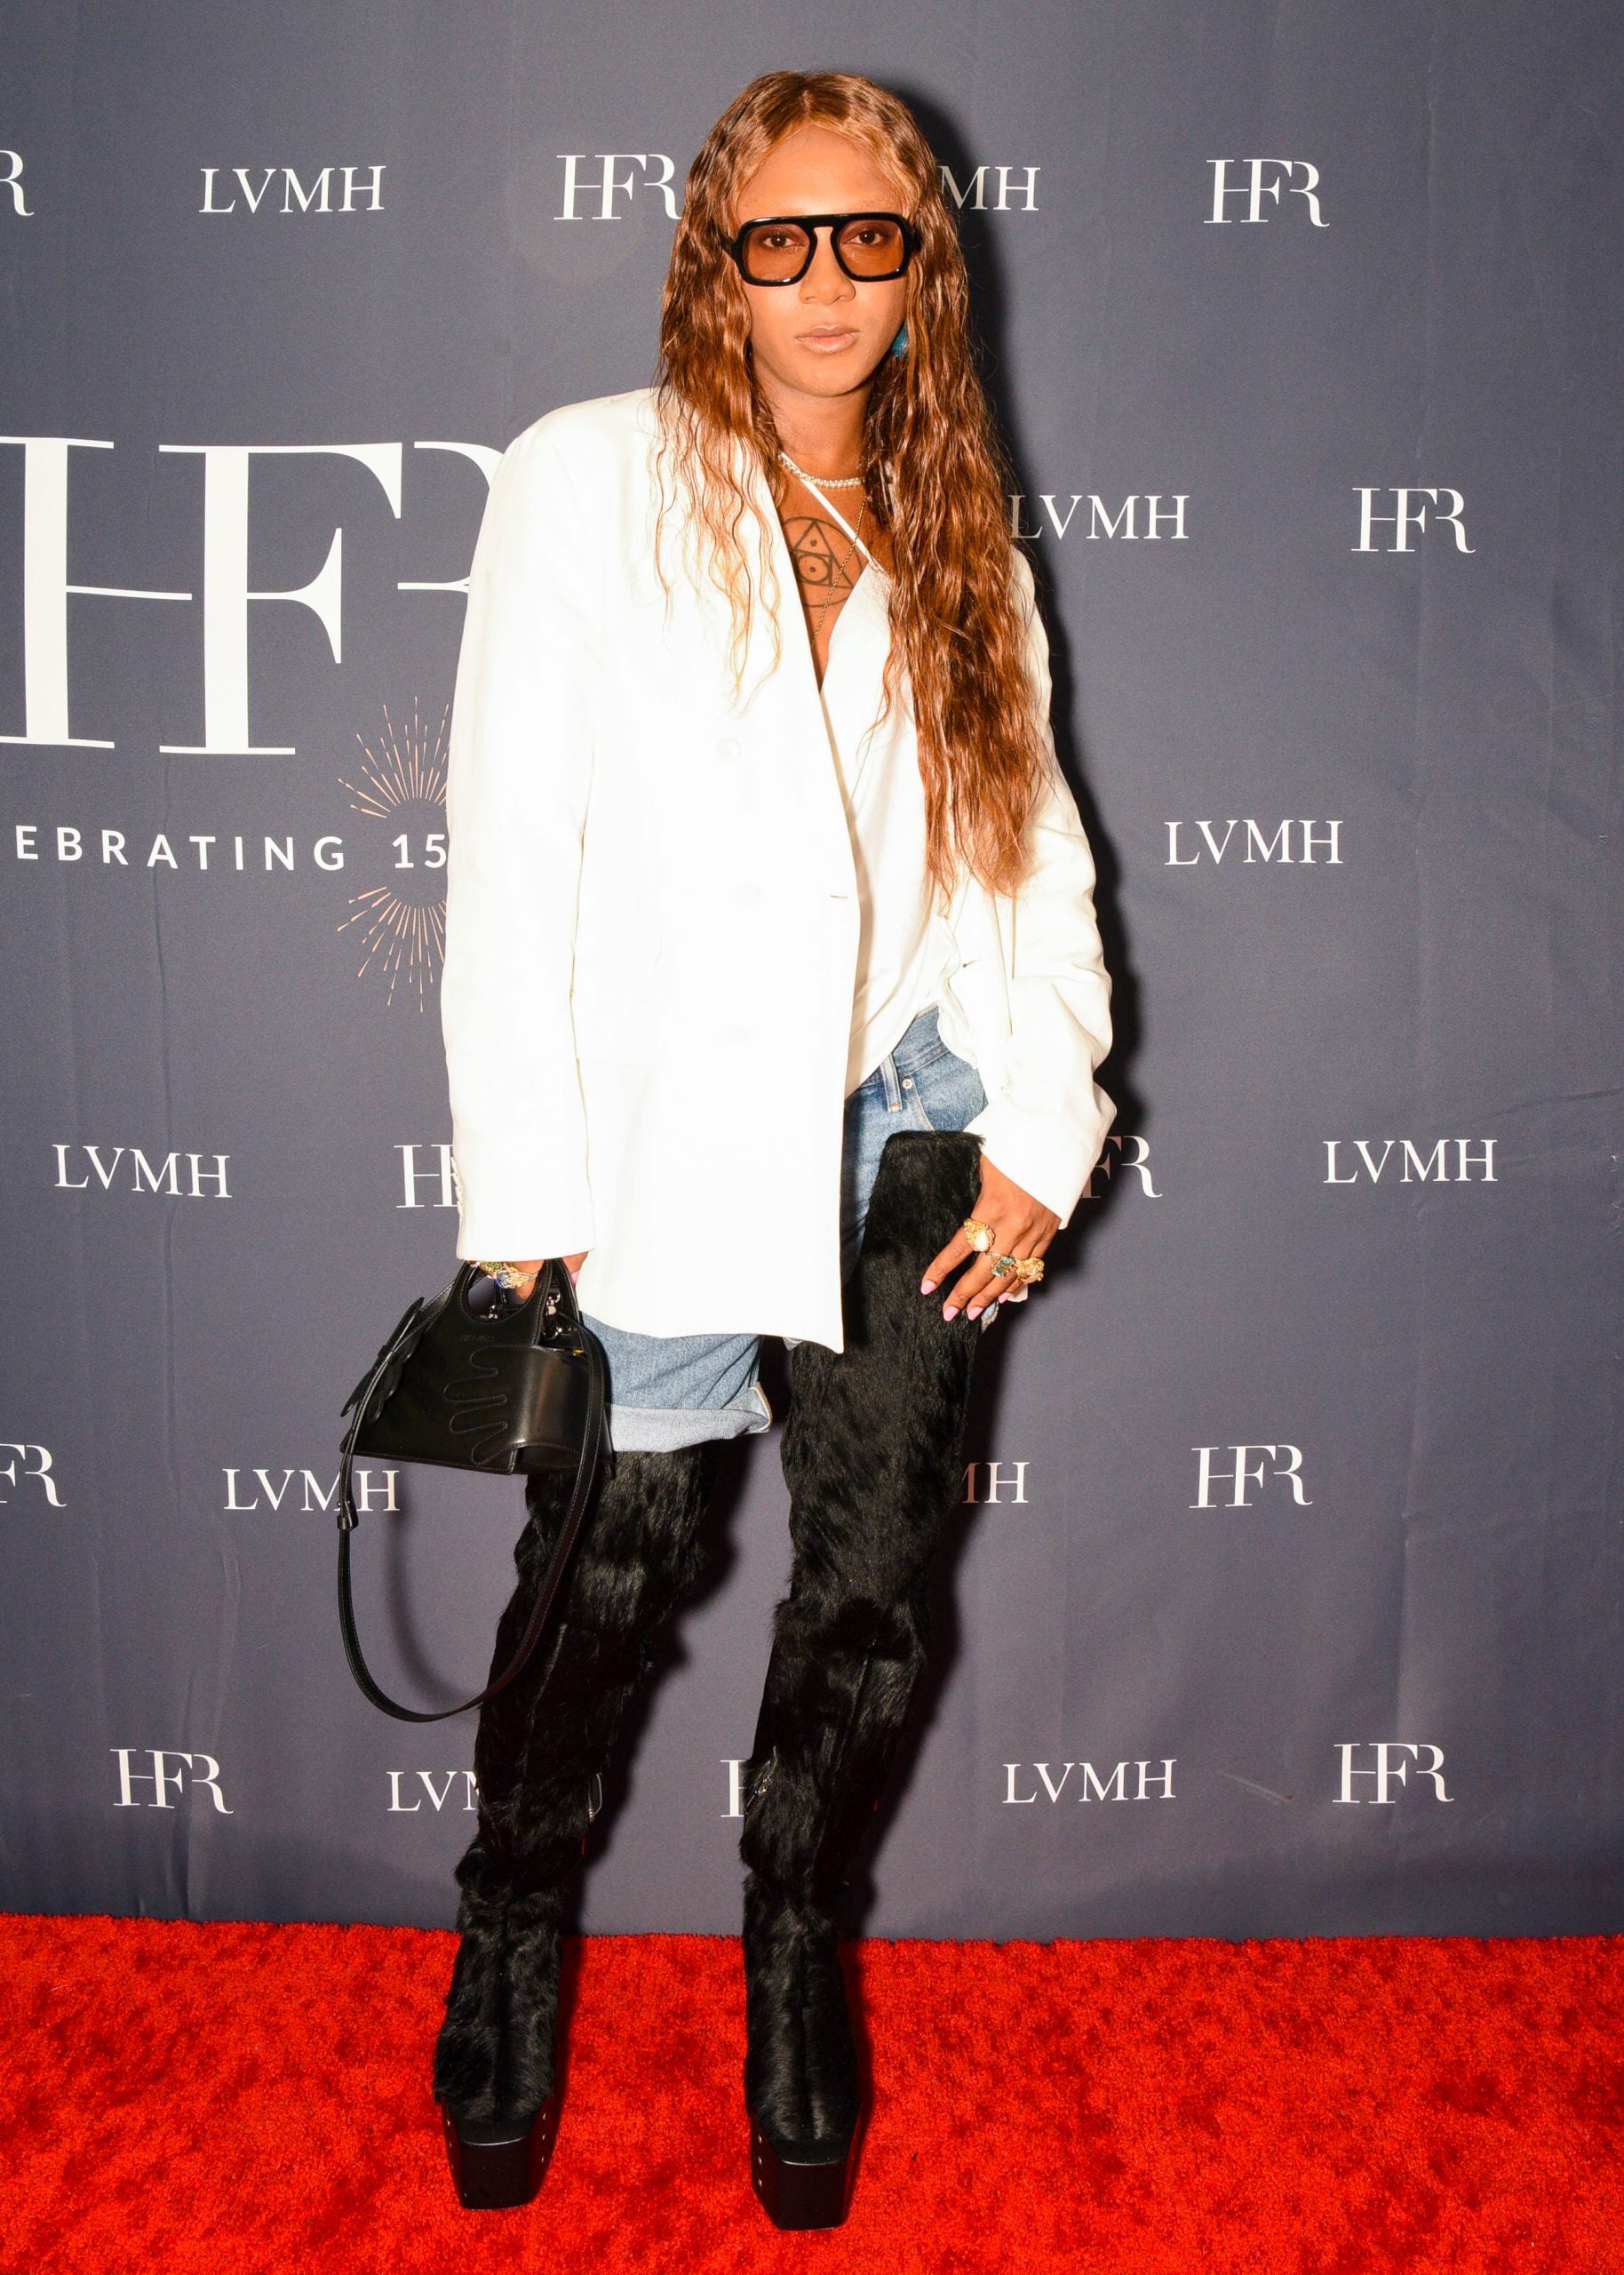 HFR Celebrates 15th Anniversary Fashion Show and Style Awards